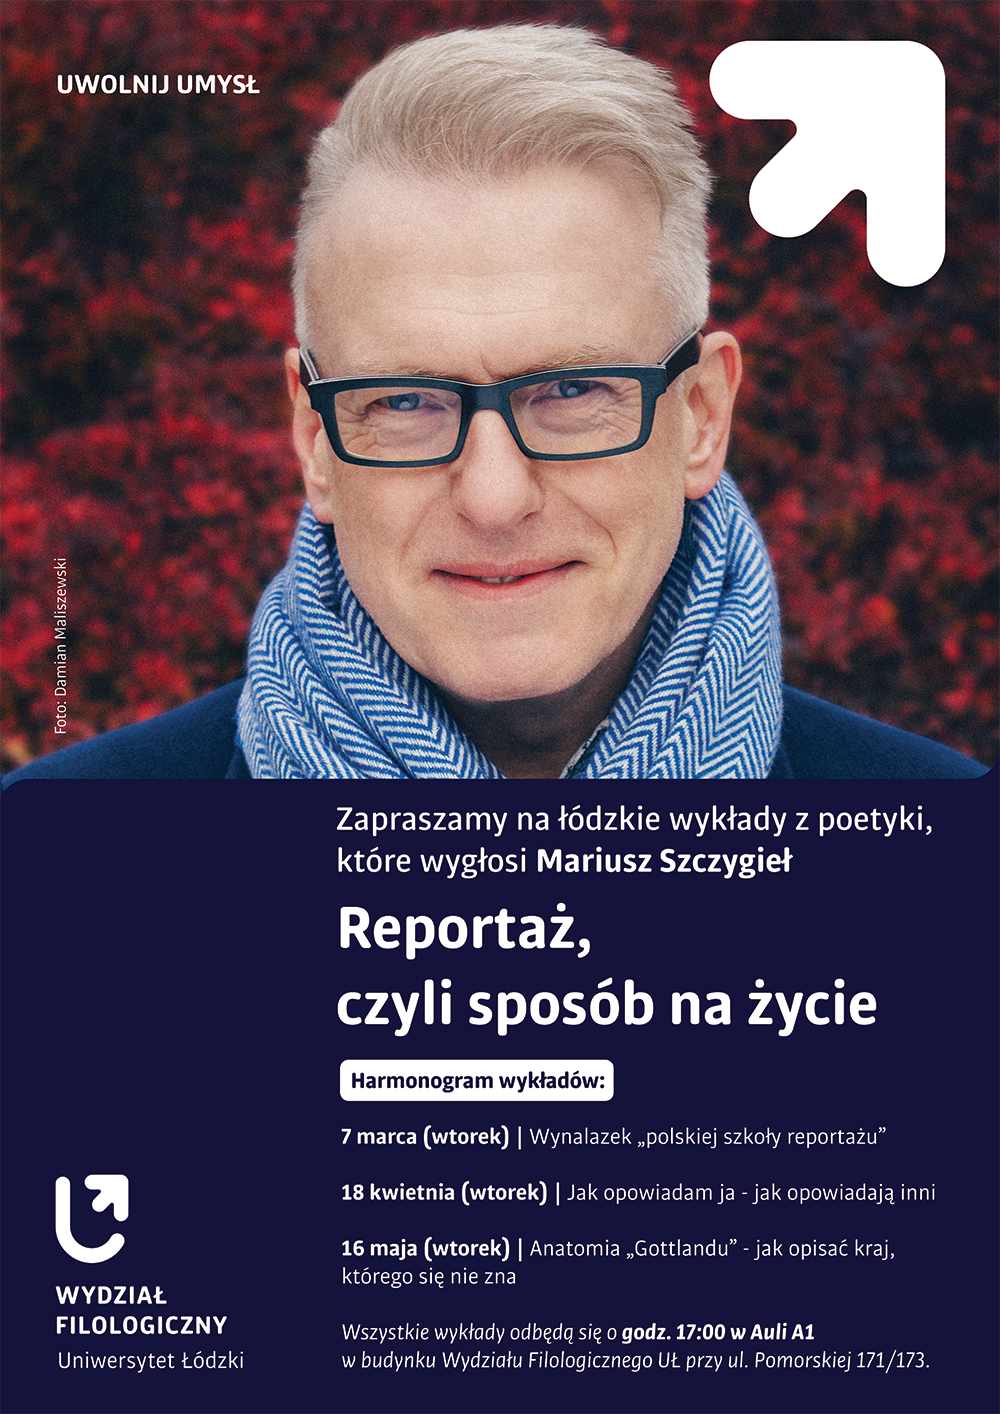 A poster with a portrait photo of Mariusz Szczygieł and information about all the events within this episode of the series